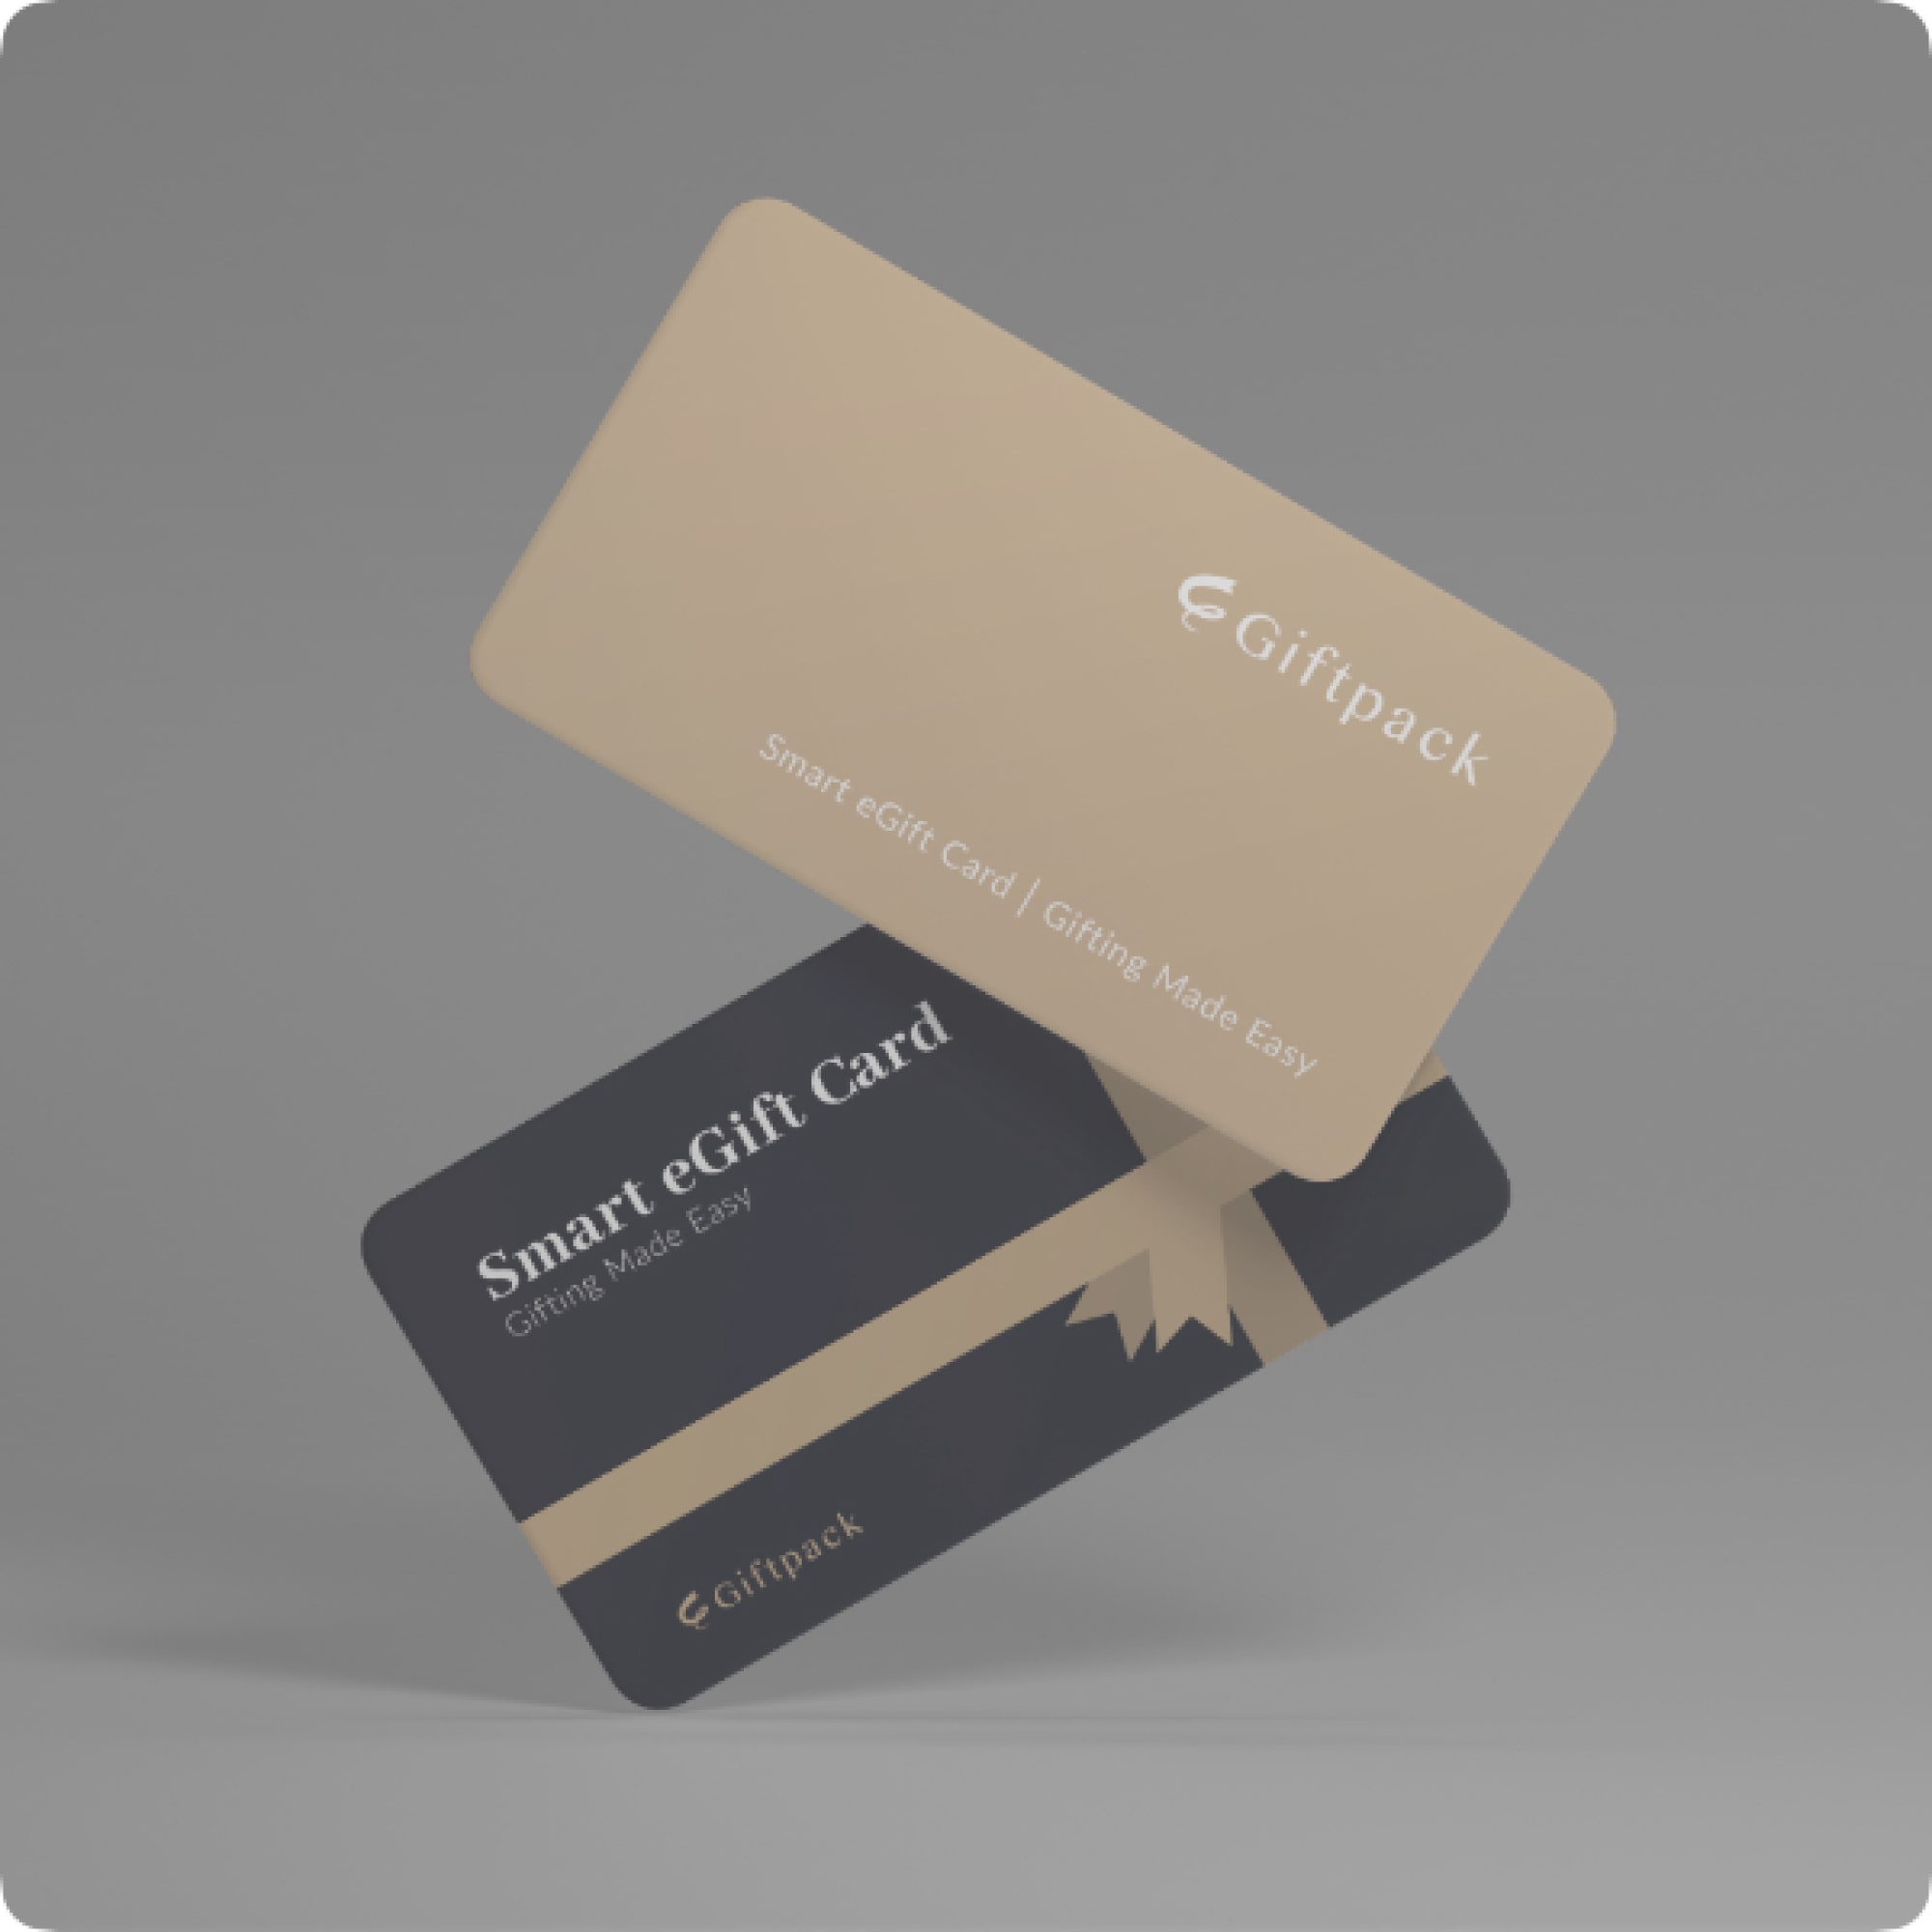 Giftpack Smart eGift Card for grand opening gifts ideas